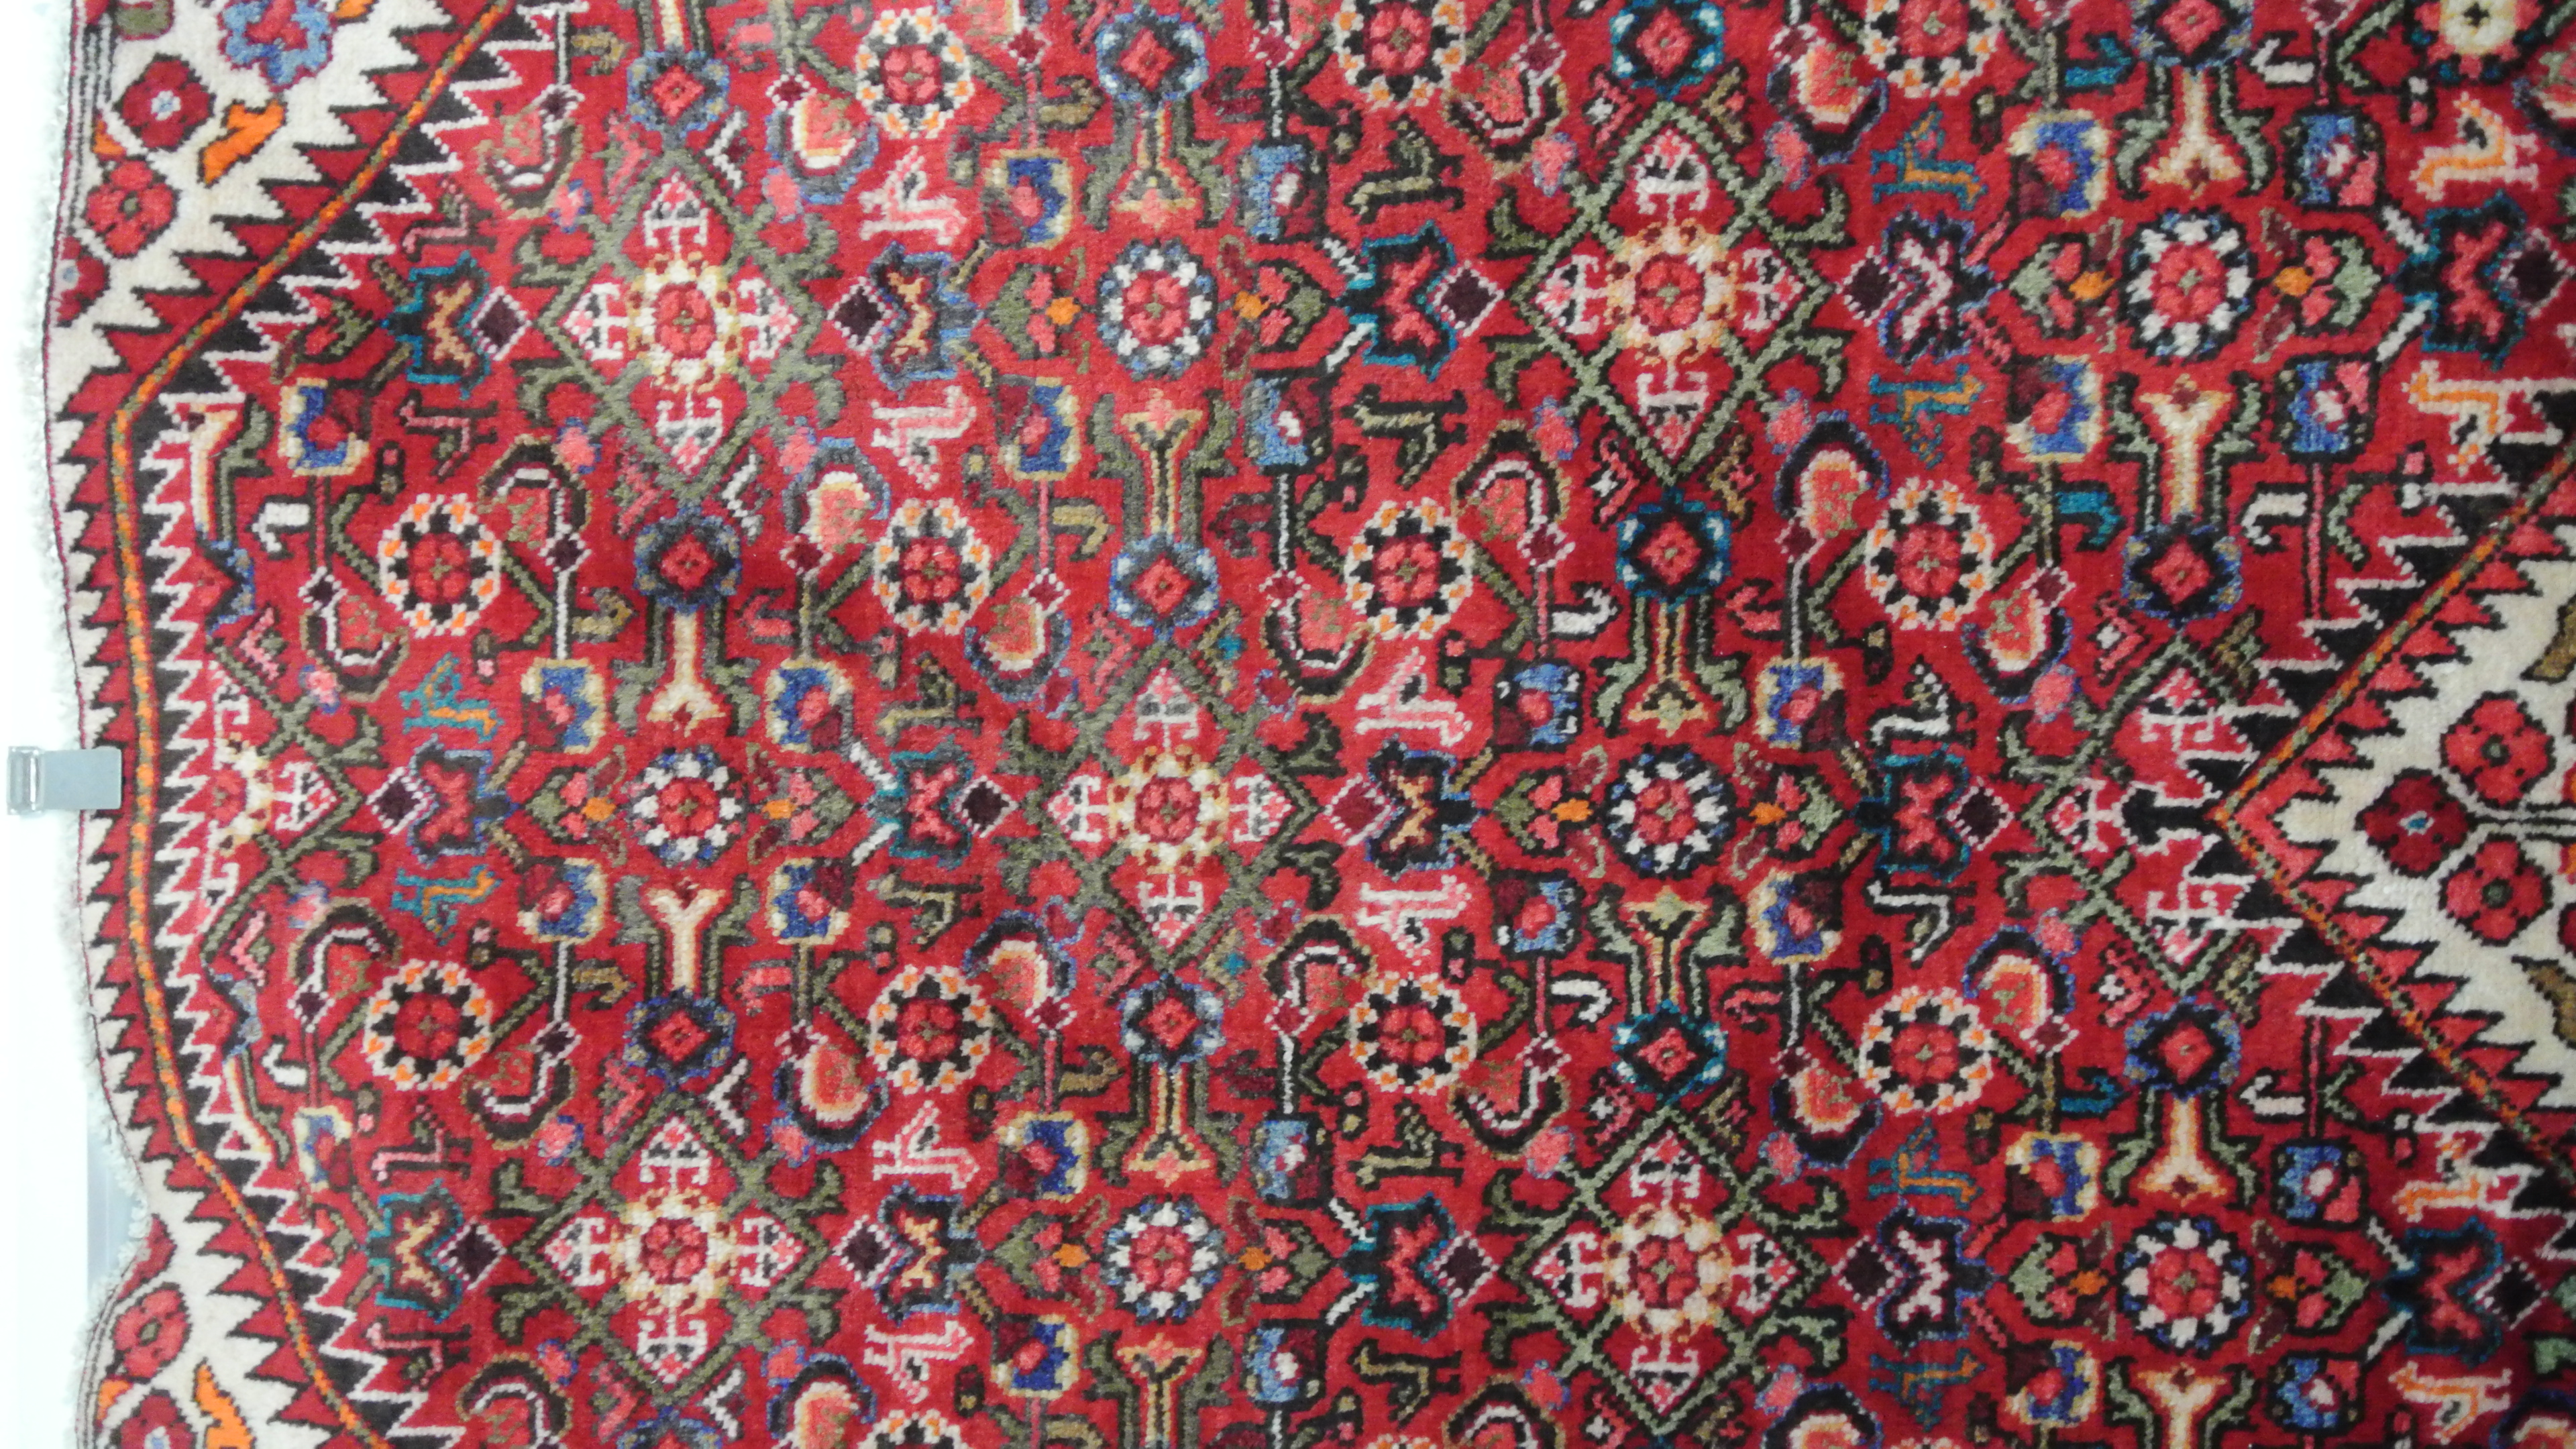 A hand knotted Hamadan rug - 2.97m x 1.